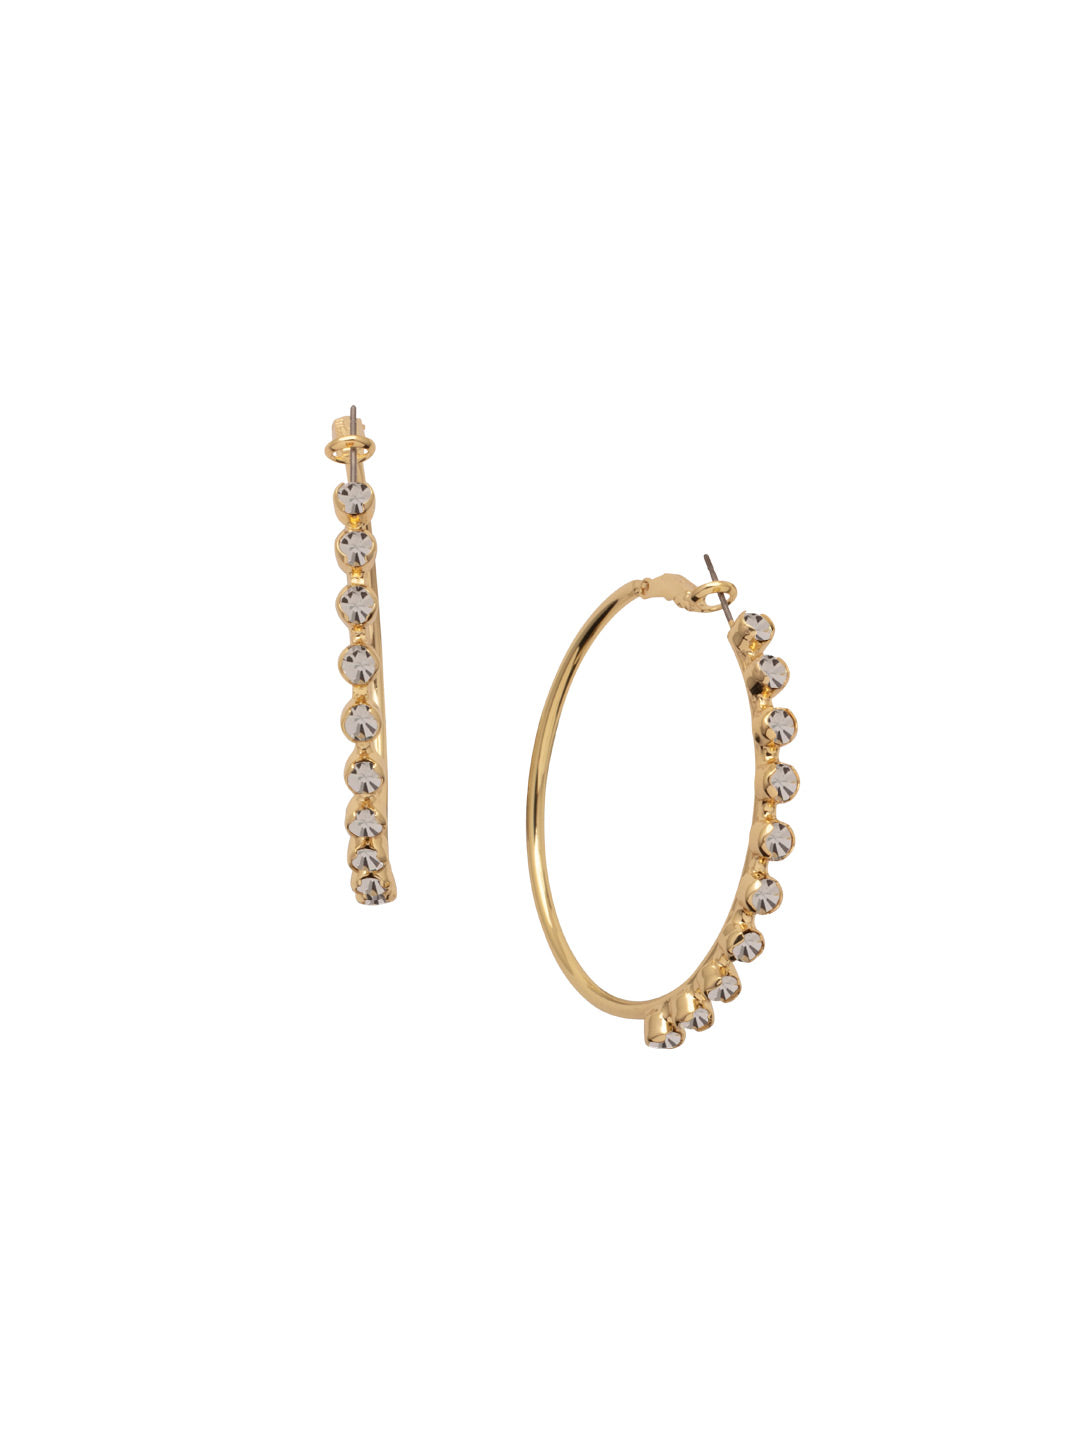 Bessie Hoop Earrings - EFF42BGCRY - <p>The Bessie Hoop Earrings feature a row of crystals on a classic metal hoop. From Sorrelli's Crystal collection in our Bright Gold-tone finish.</p>